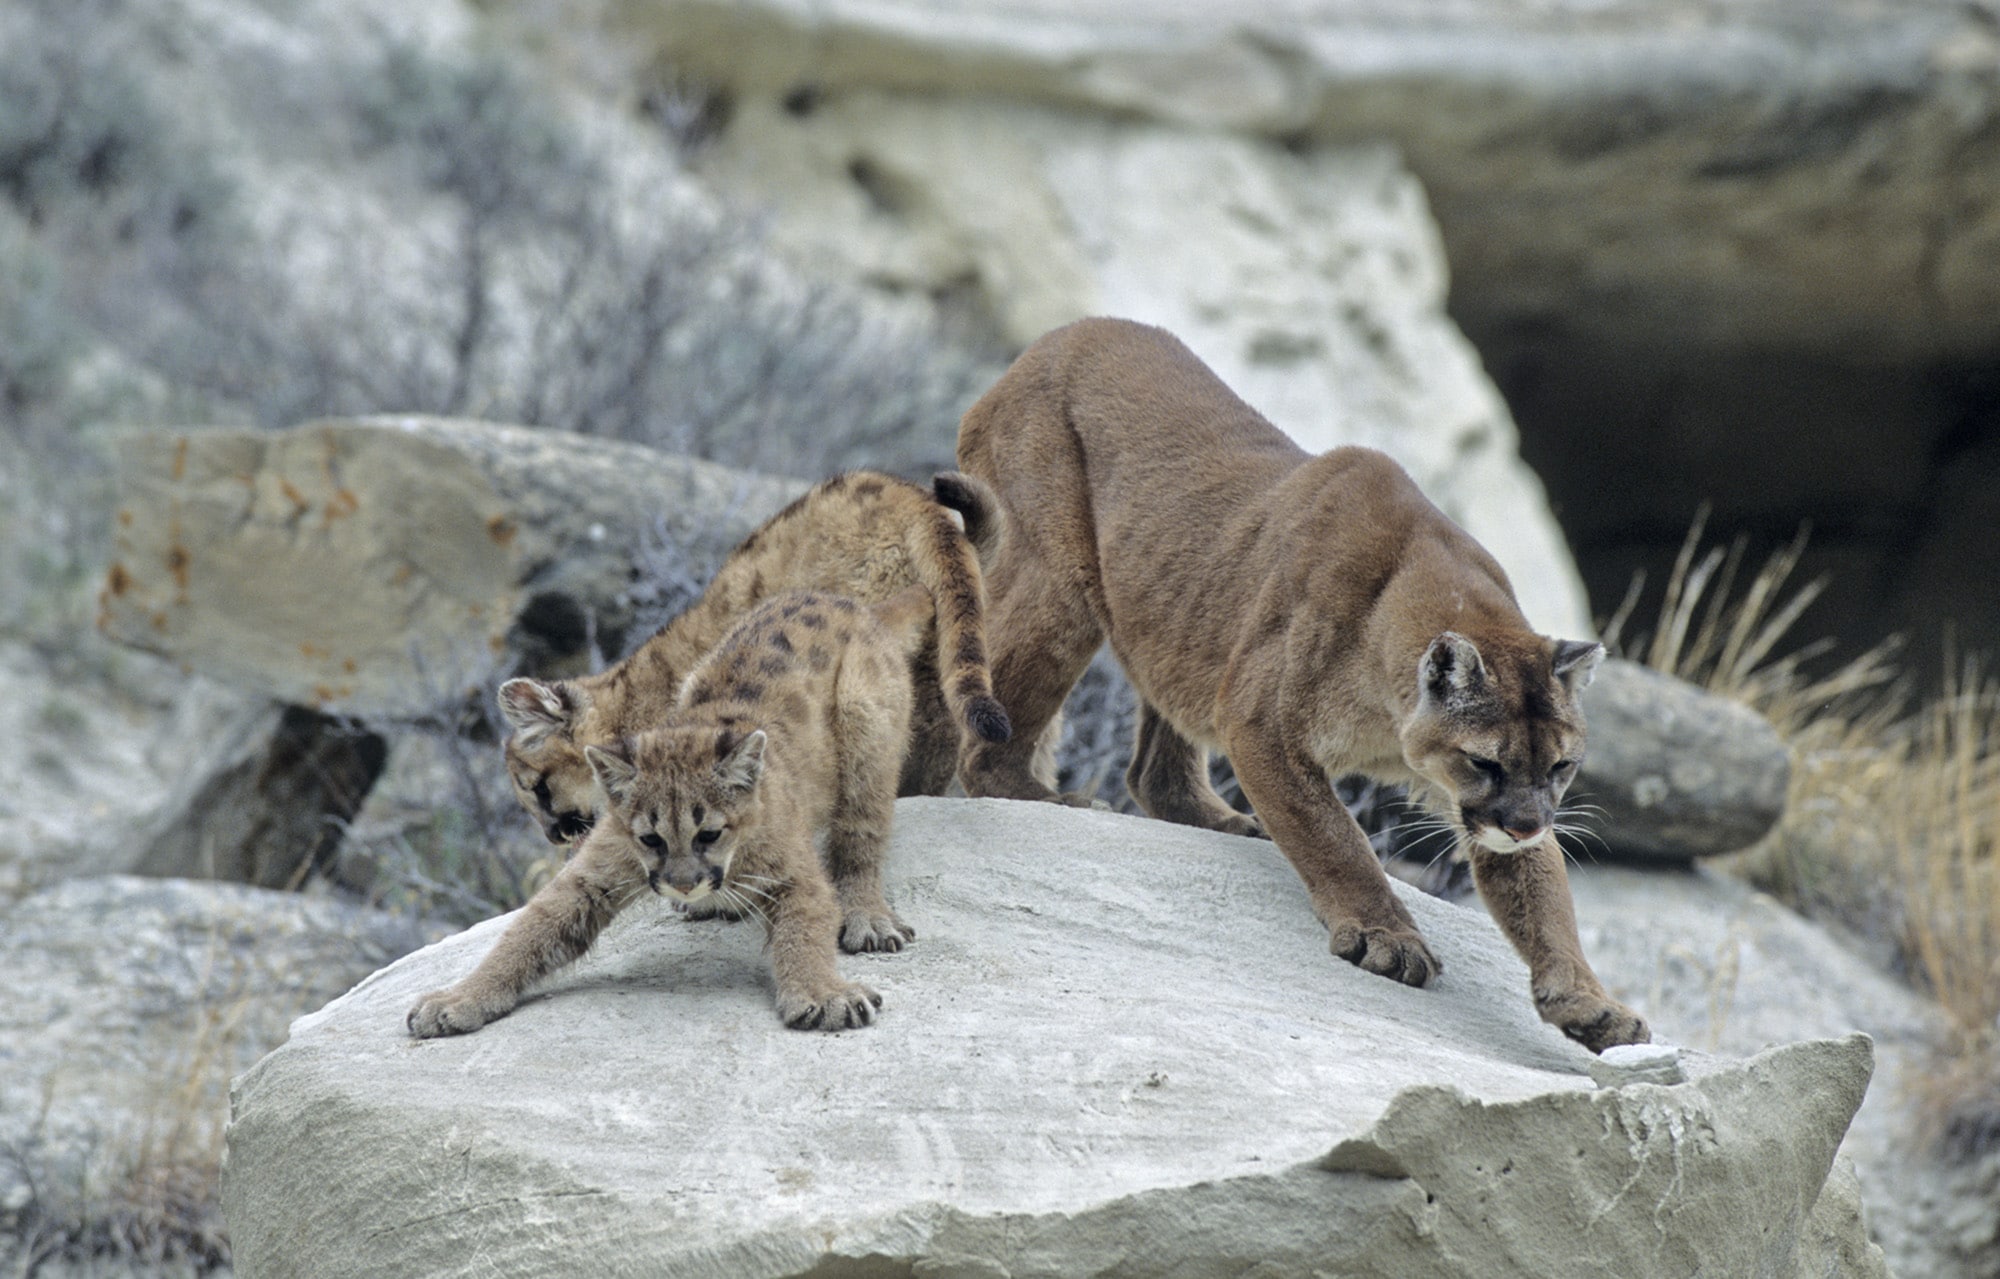 Cougar and kits in rocks in the badlands.